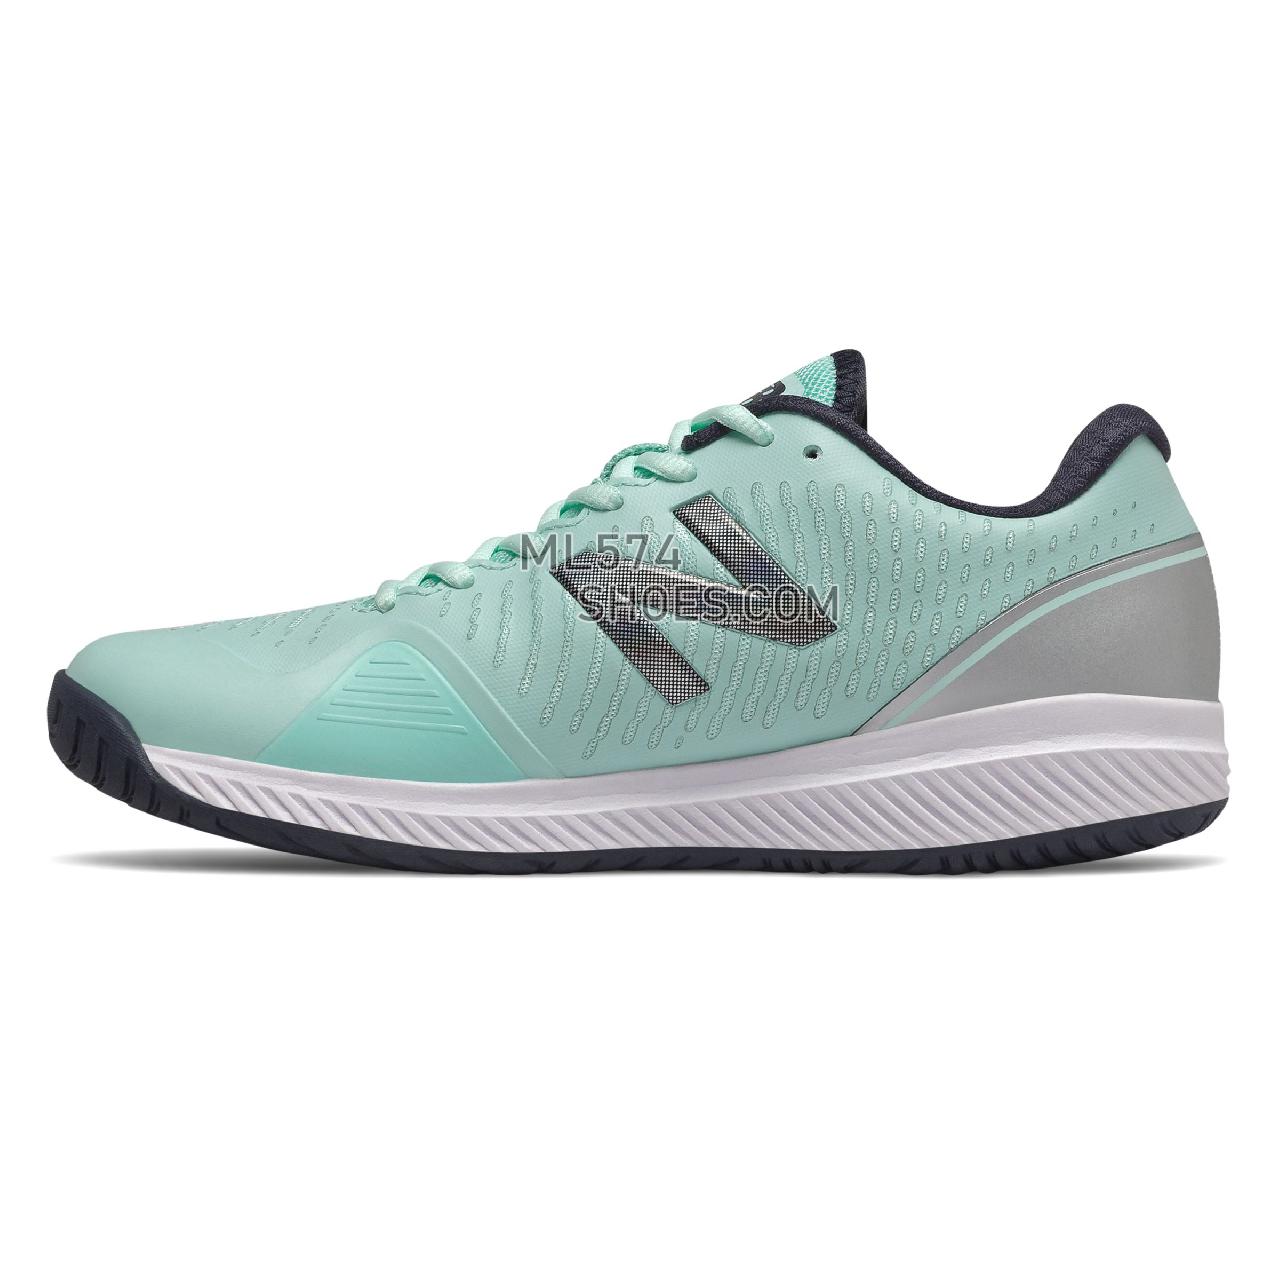 New Balance 796v2 - Women's Tennis - Bali Blue with Silver - WCH796T2